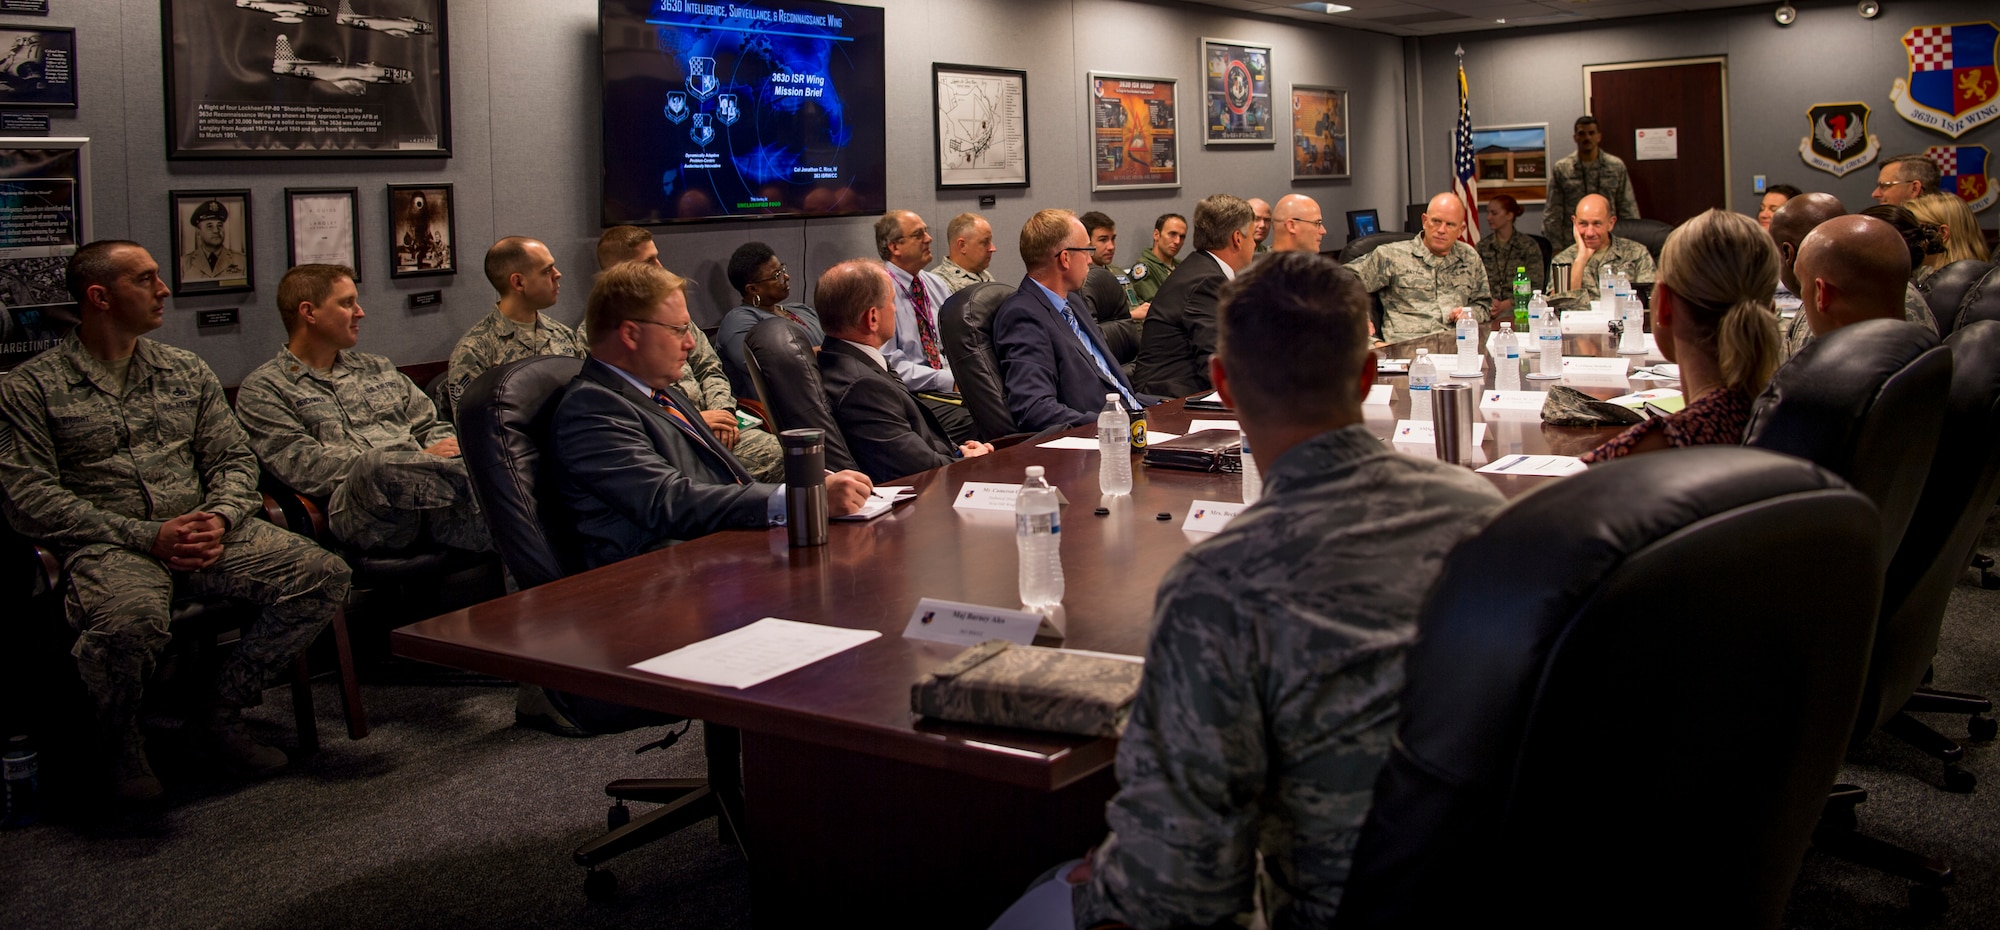 U.S. Air Force Gen. Mike Holmes, commander of Air Combat Command, and his wife Sara Holmes visit the 363rd Intelligence Surveillance Reconnaissance Wing at Joint Base Langley-Eustis, Virginia, Sept. 5, 2018. Holmes met with senior leaders and attended several briefings to learn more about the 363rd ISRW’s mission, Airmen and innovation initiatives. (U.S. Air Force photo by Staff Sgt. Areca T. Bell)